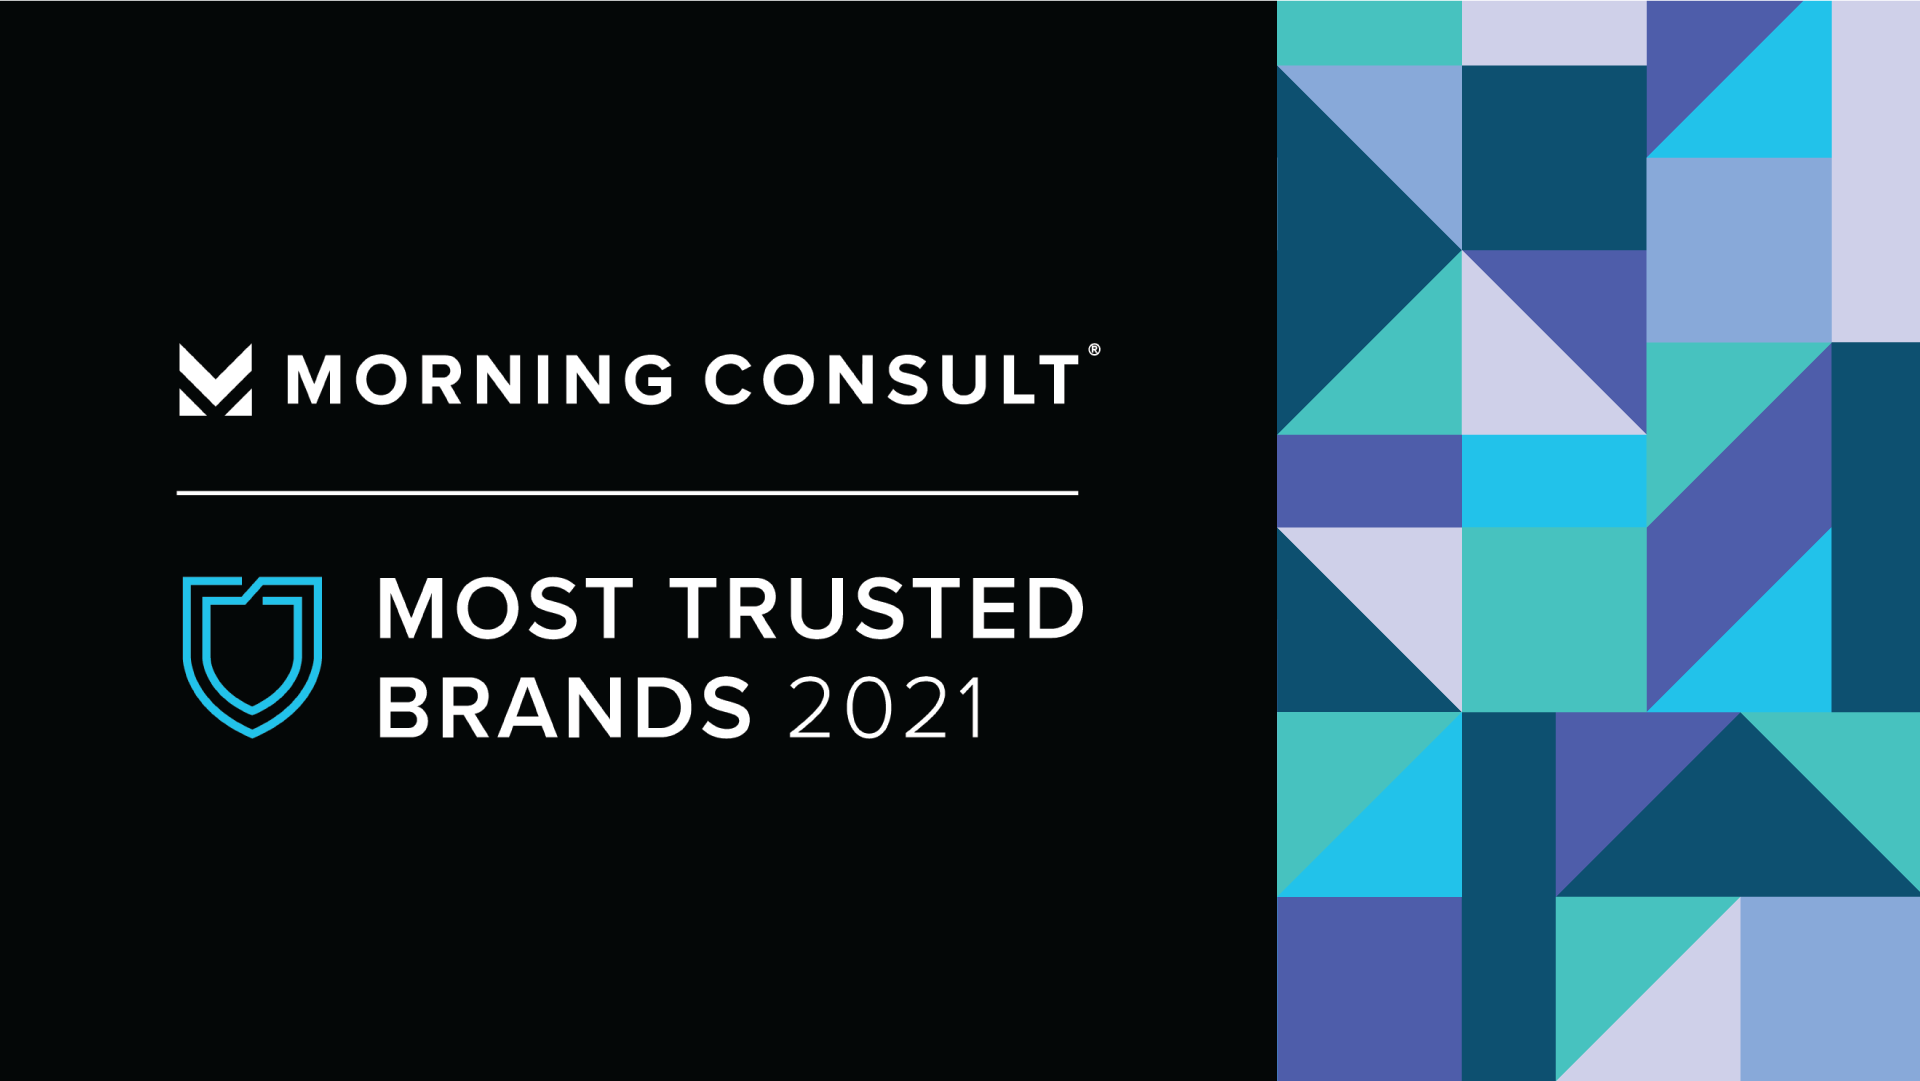 Most Trusted Brands 2021 - Morning Consult